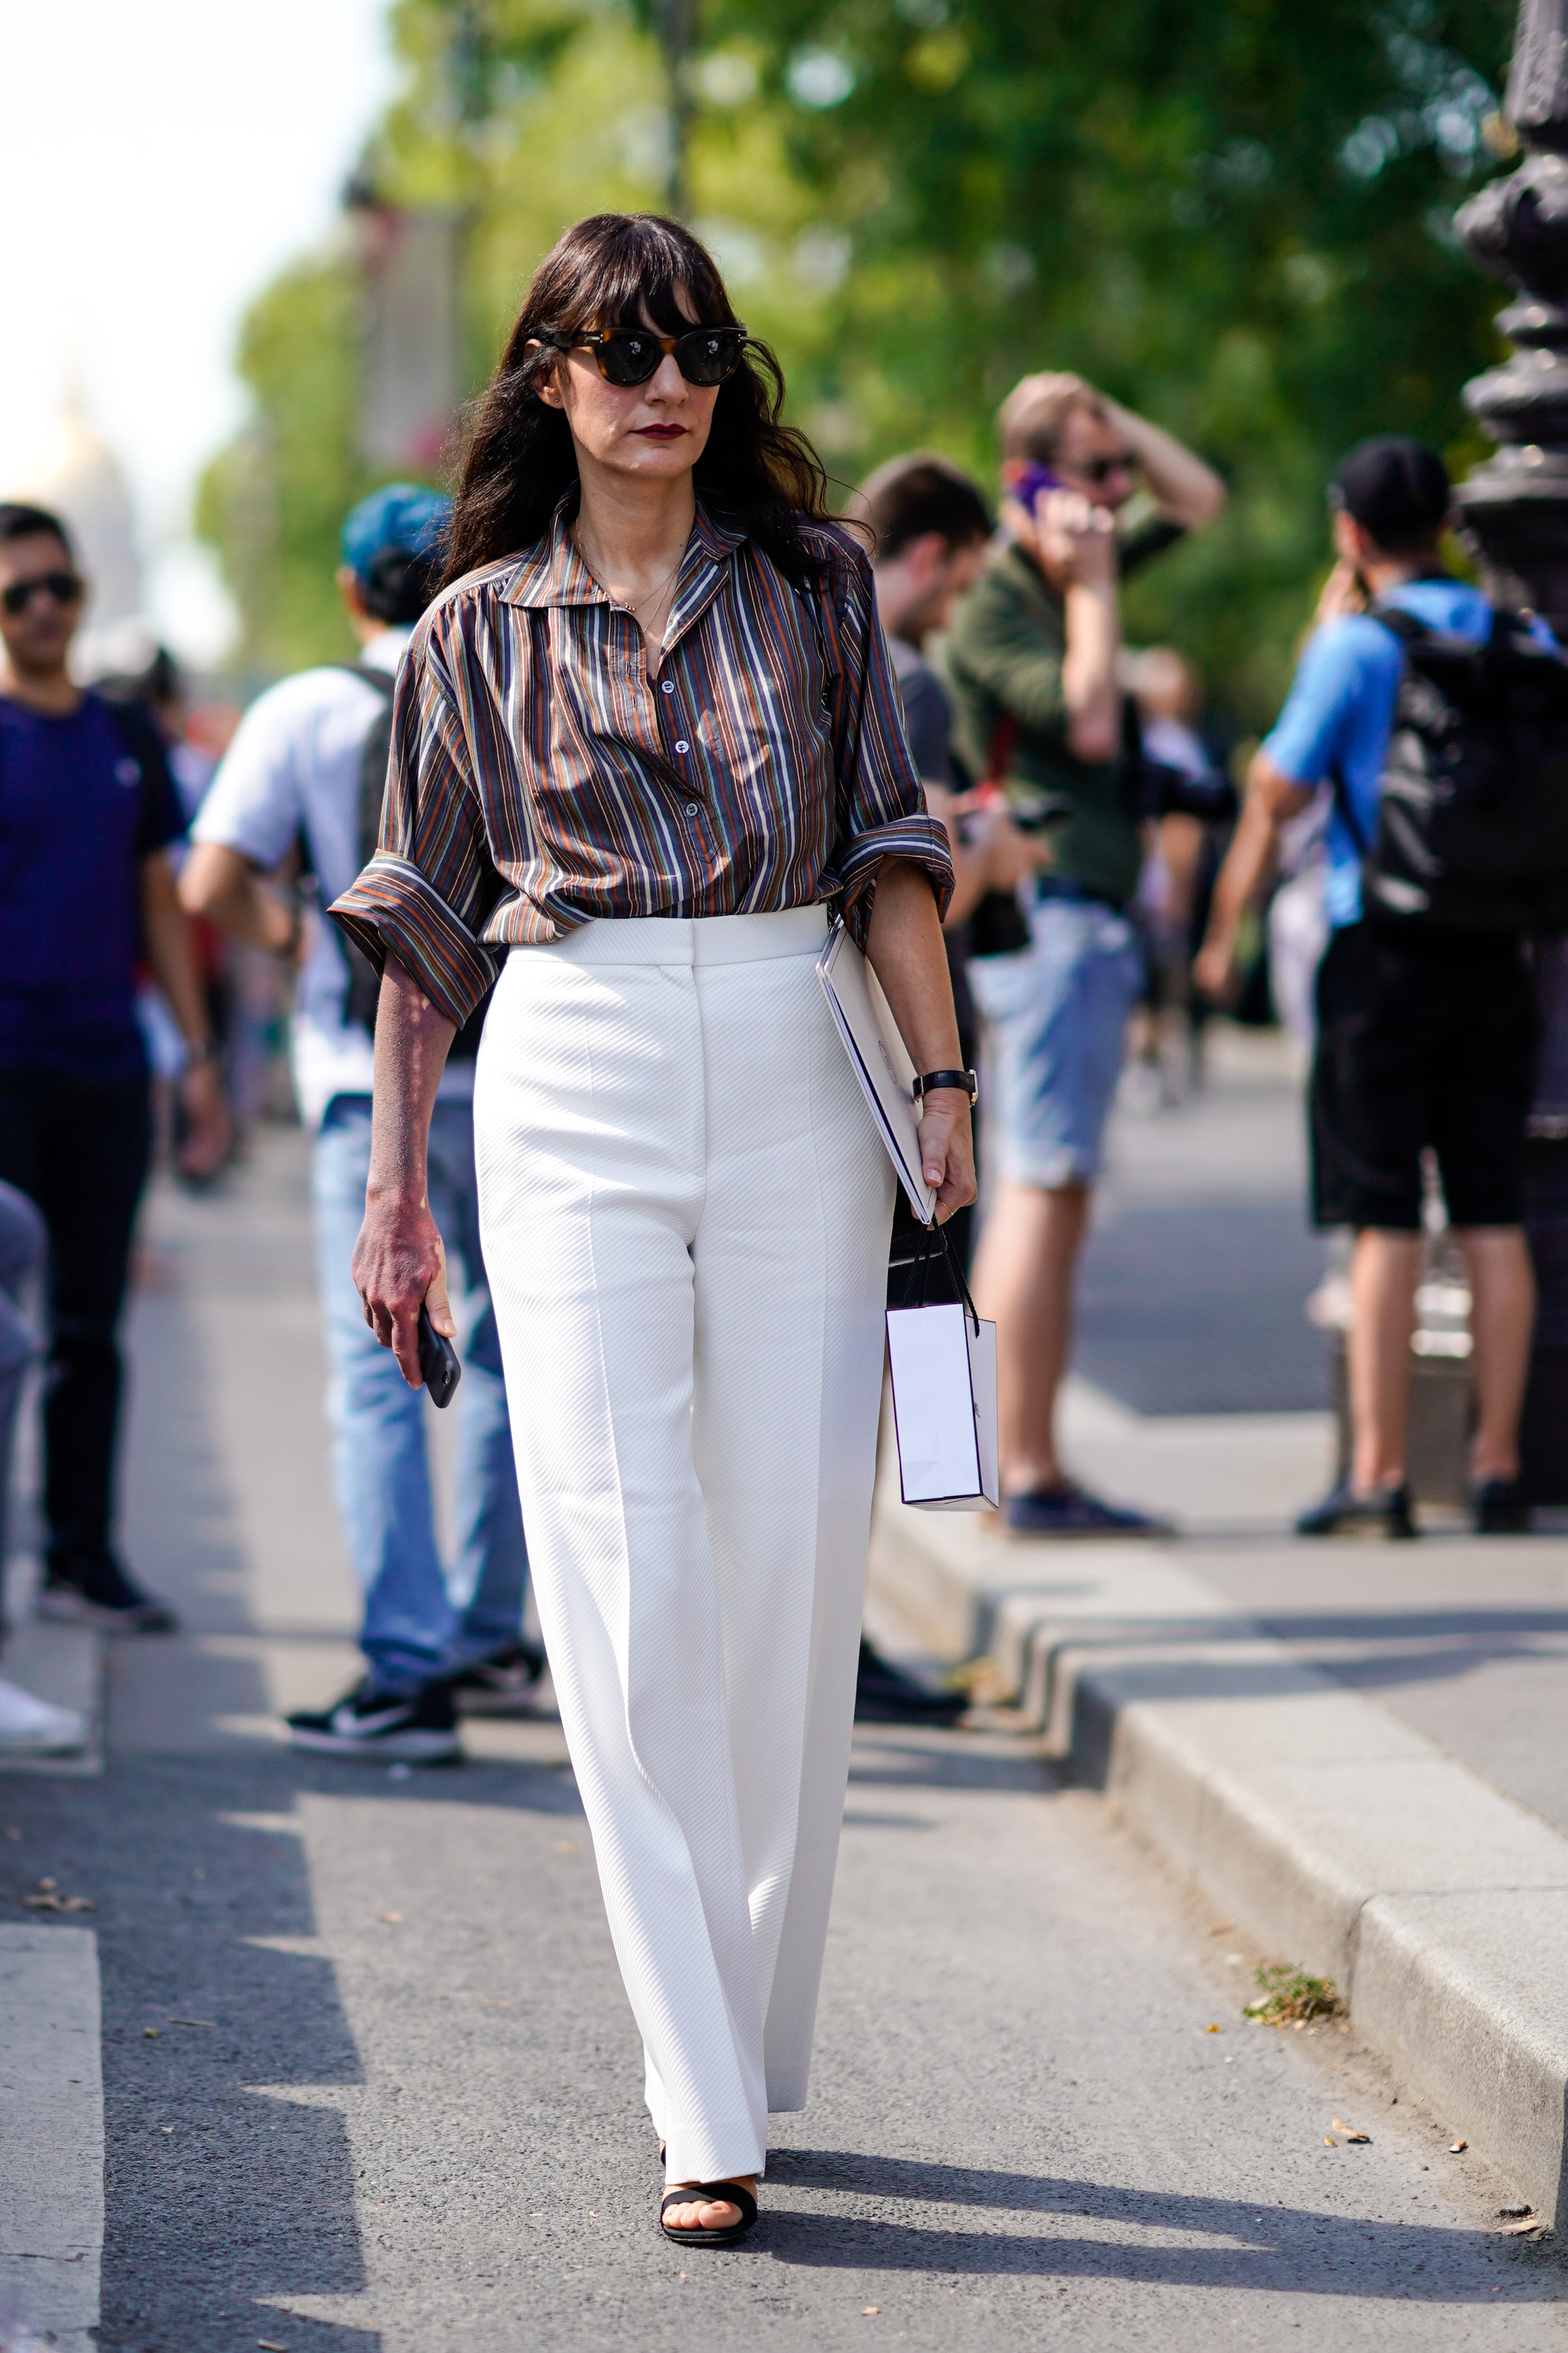 The Biggest Style Mistake to Make with High Waisted Trousers